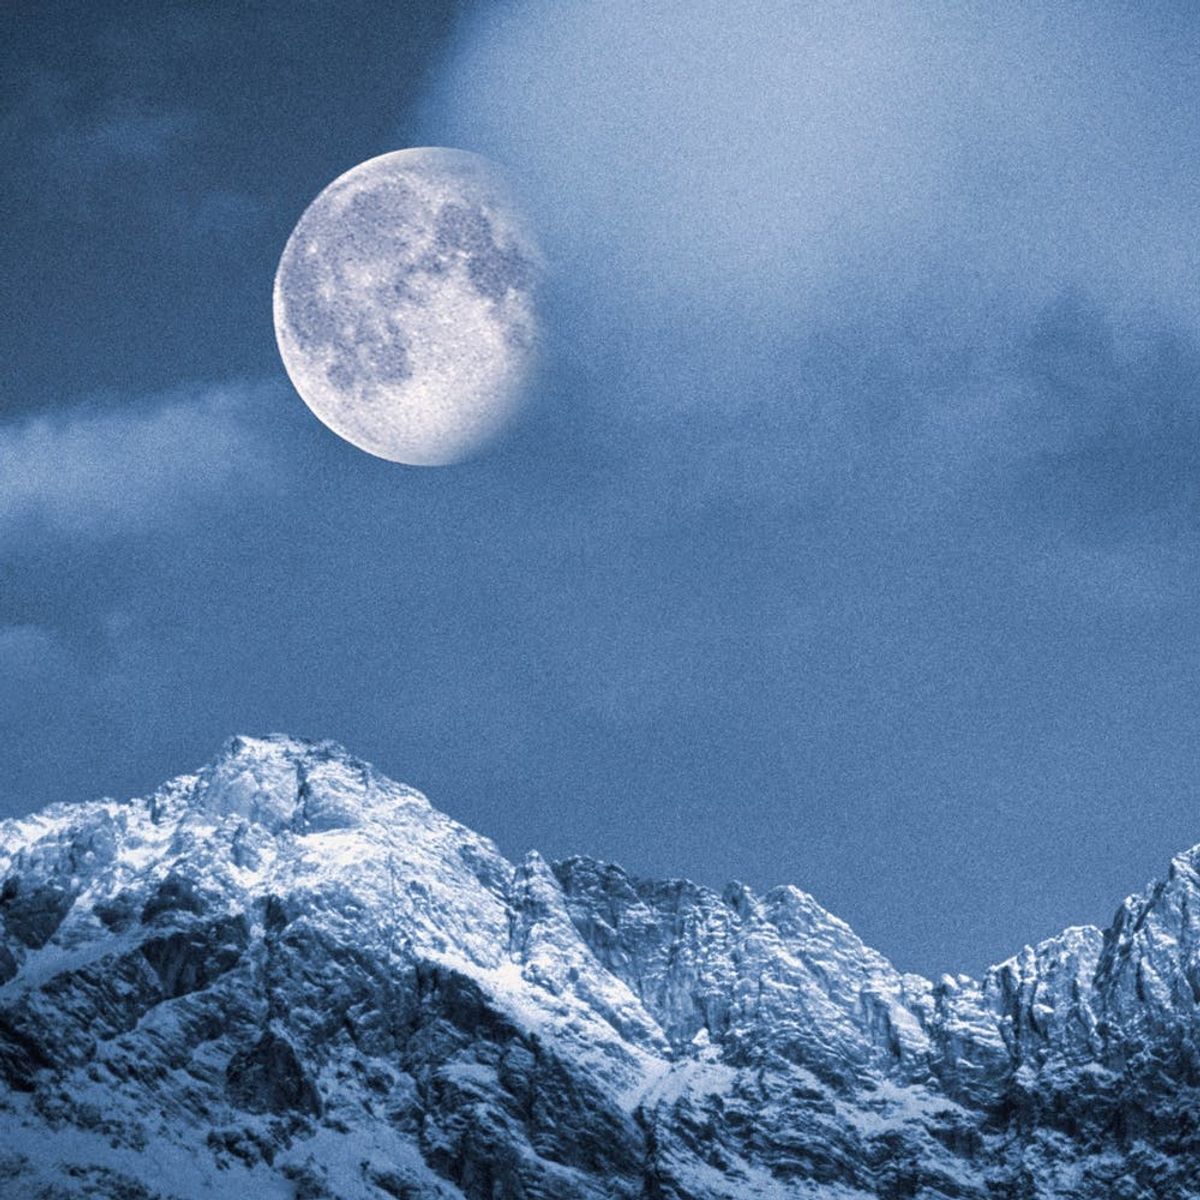 The Snow Moon, Lunar Eclipse AND a Comet Are All Coming This Friday